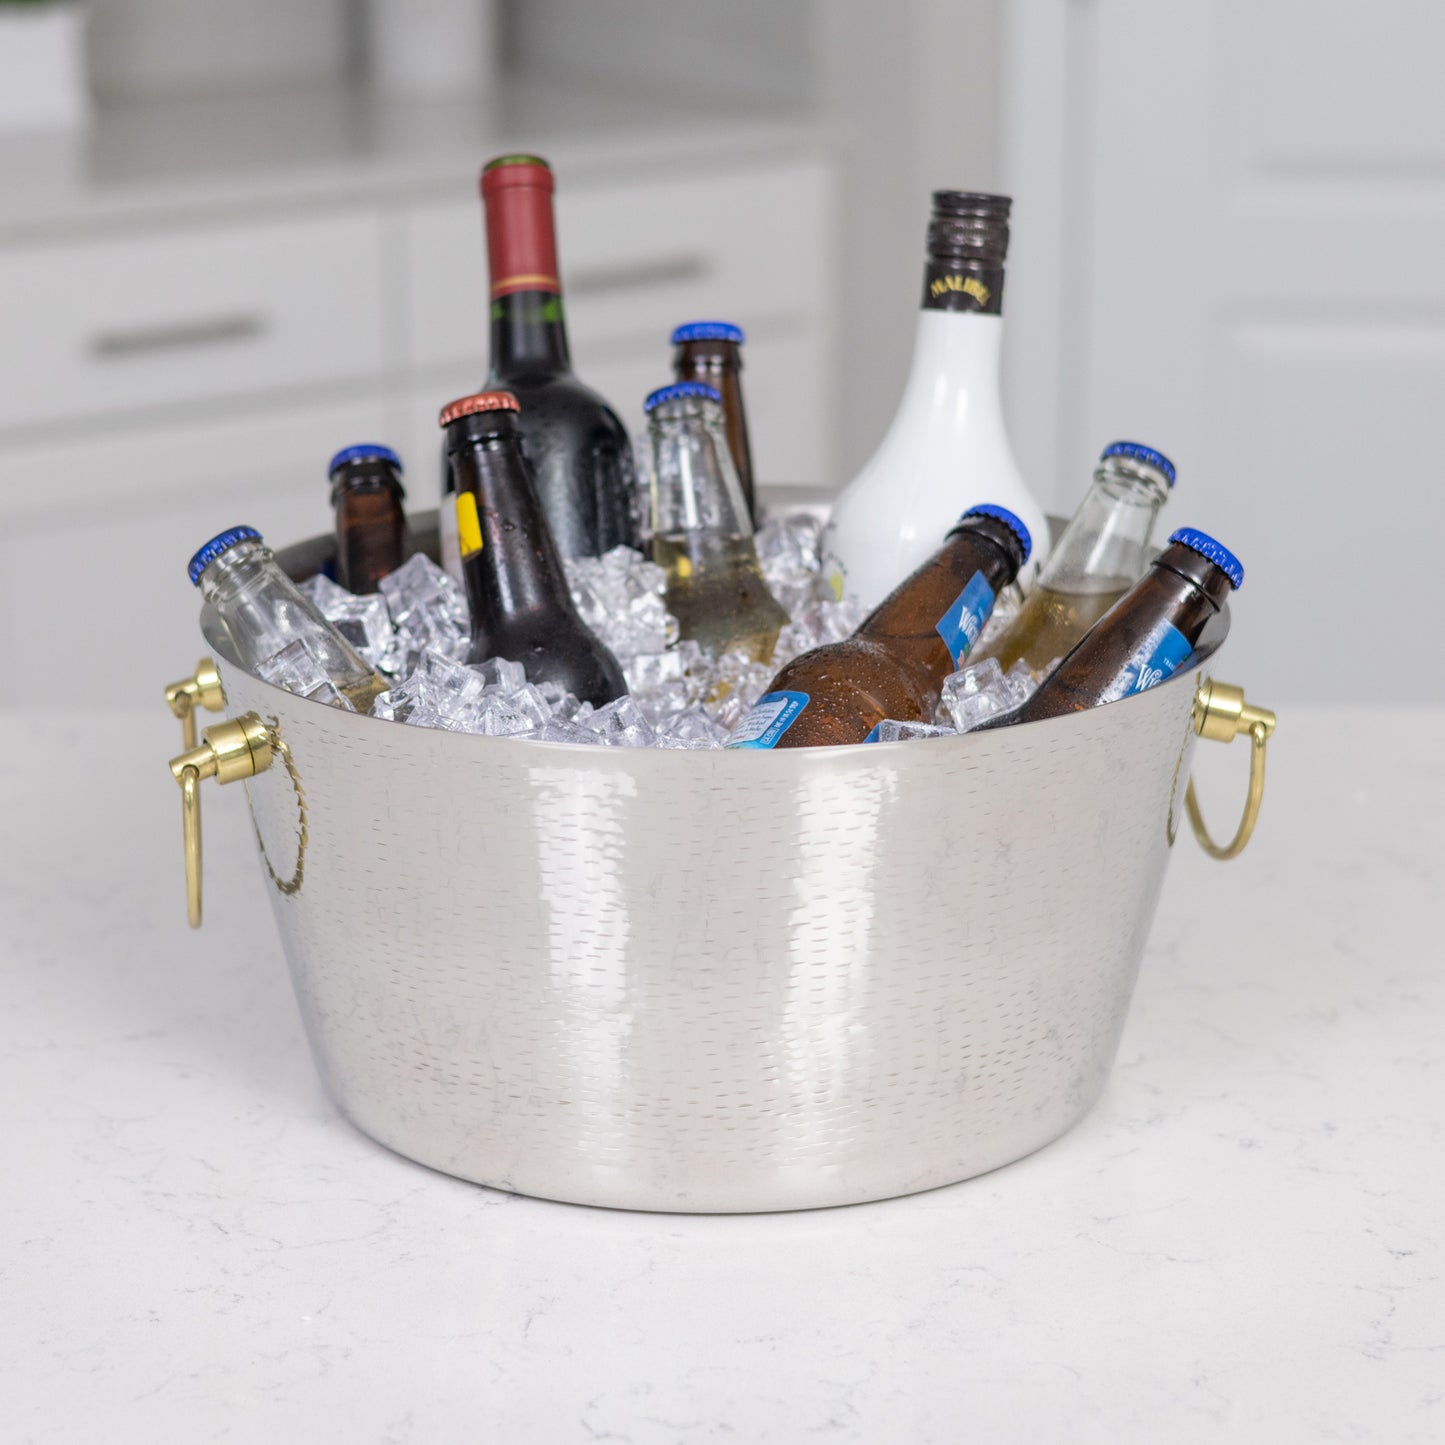 Round insulated party bucket with custom name or monogram.  Includes elegant gold handles making for a perfect wedding, anniversary, or engagement gift.